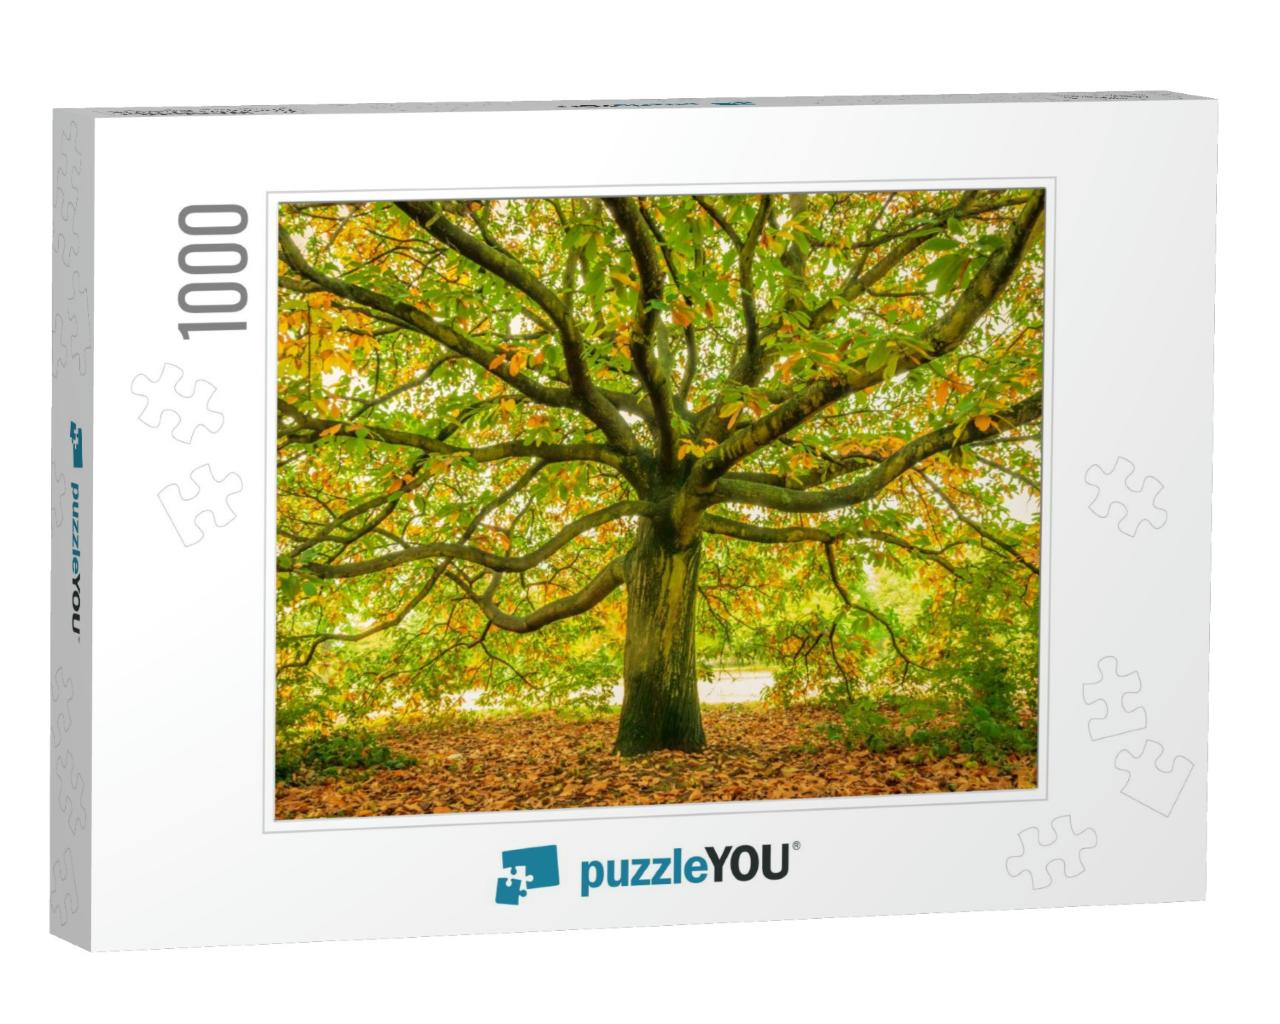 Large Oak Tree, London, England... Jigsaw Puzzle with 1000 pieces